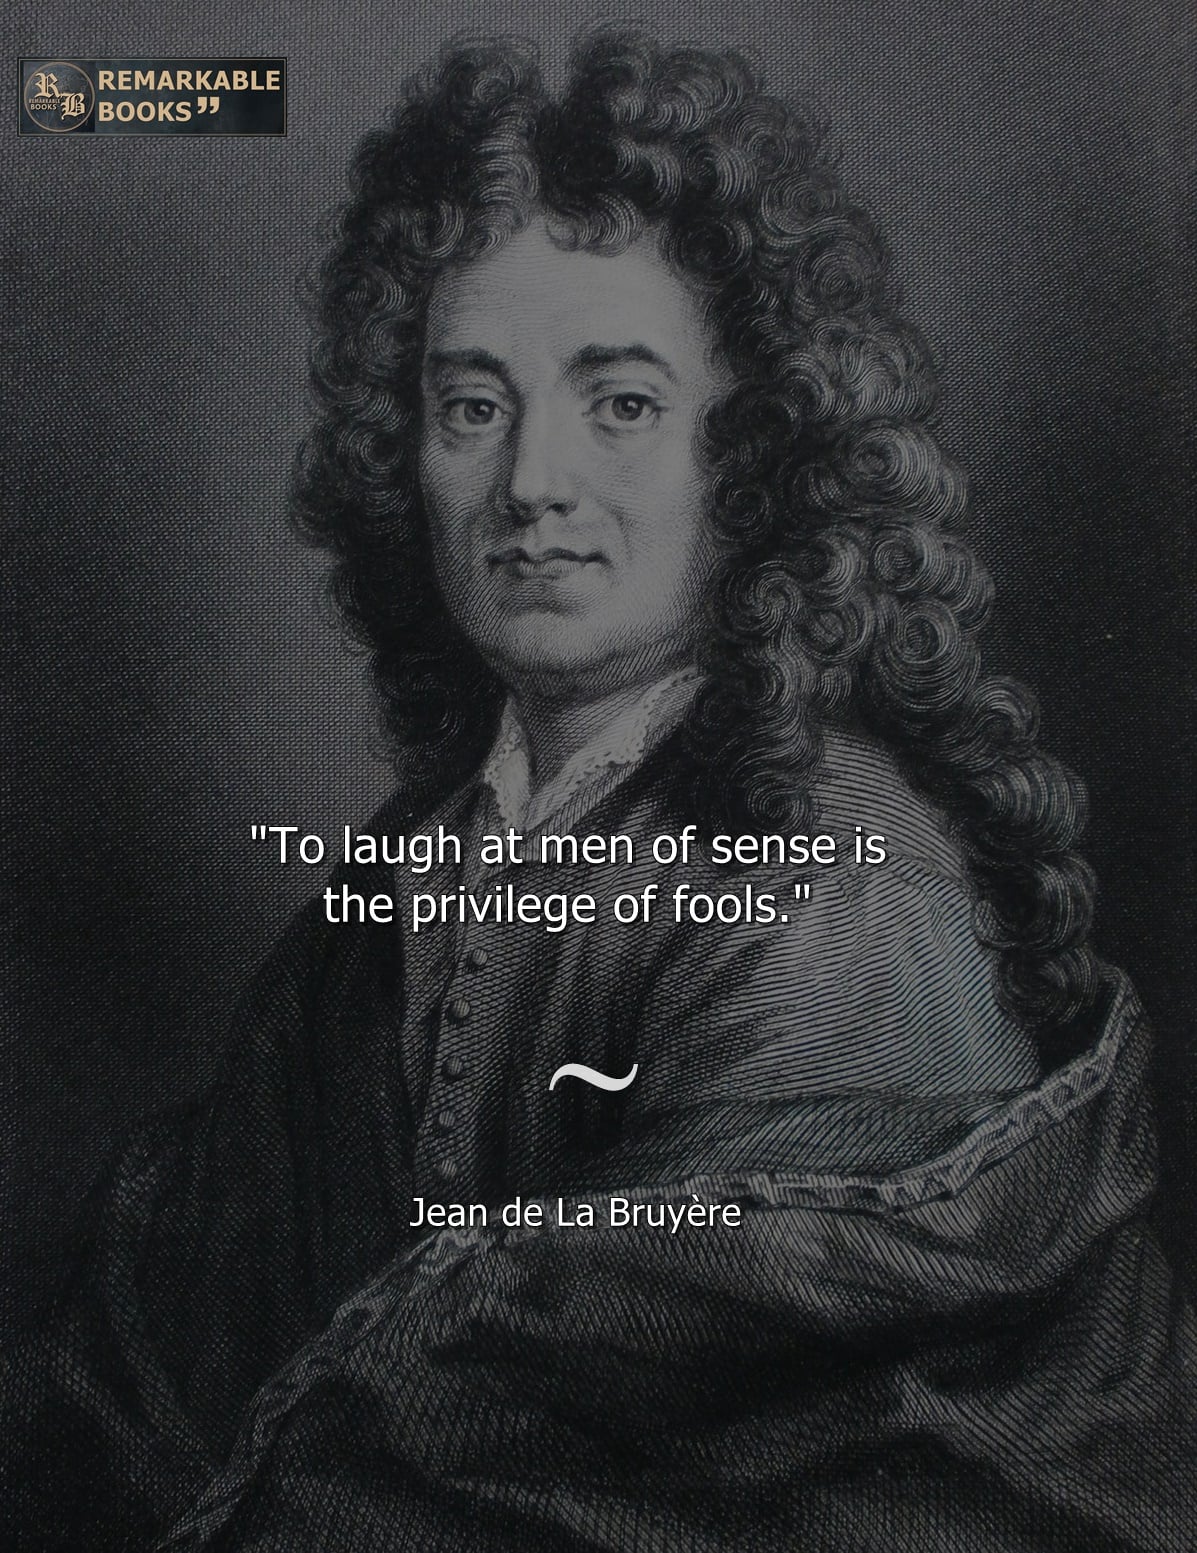 To laugh at men of sense is the privilege of fools.